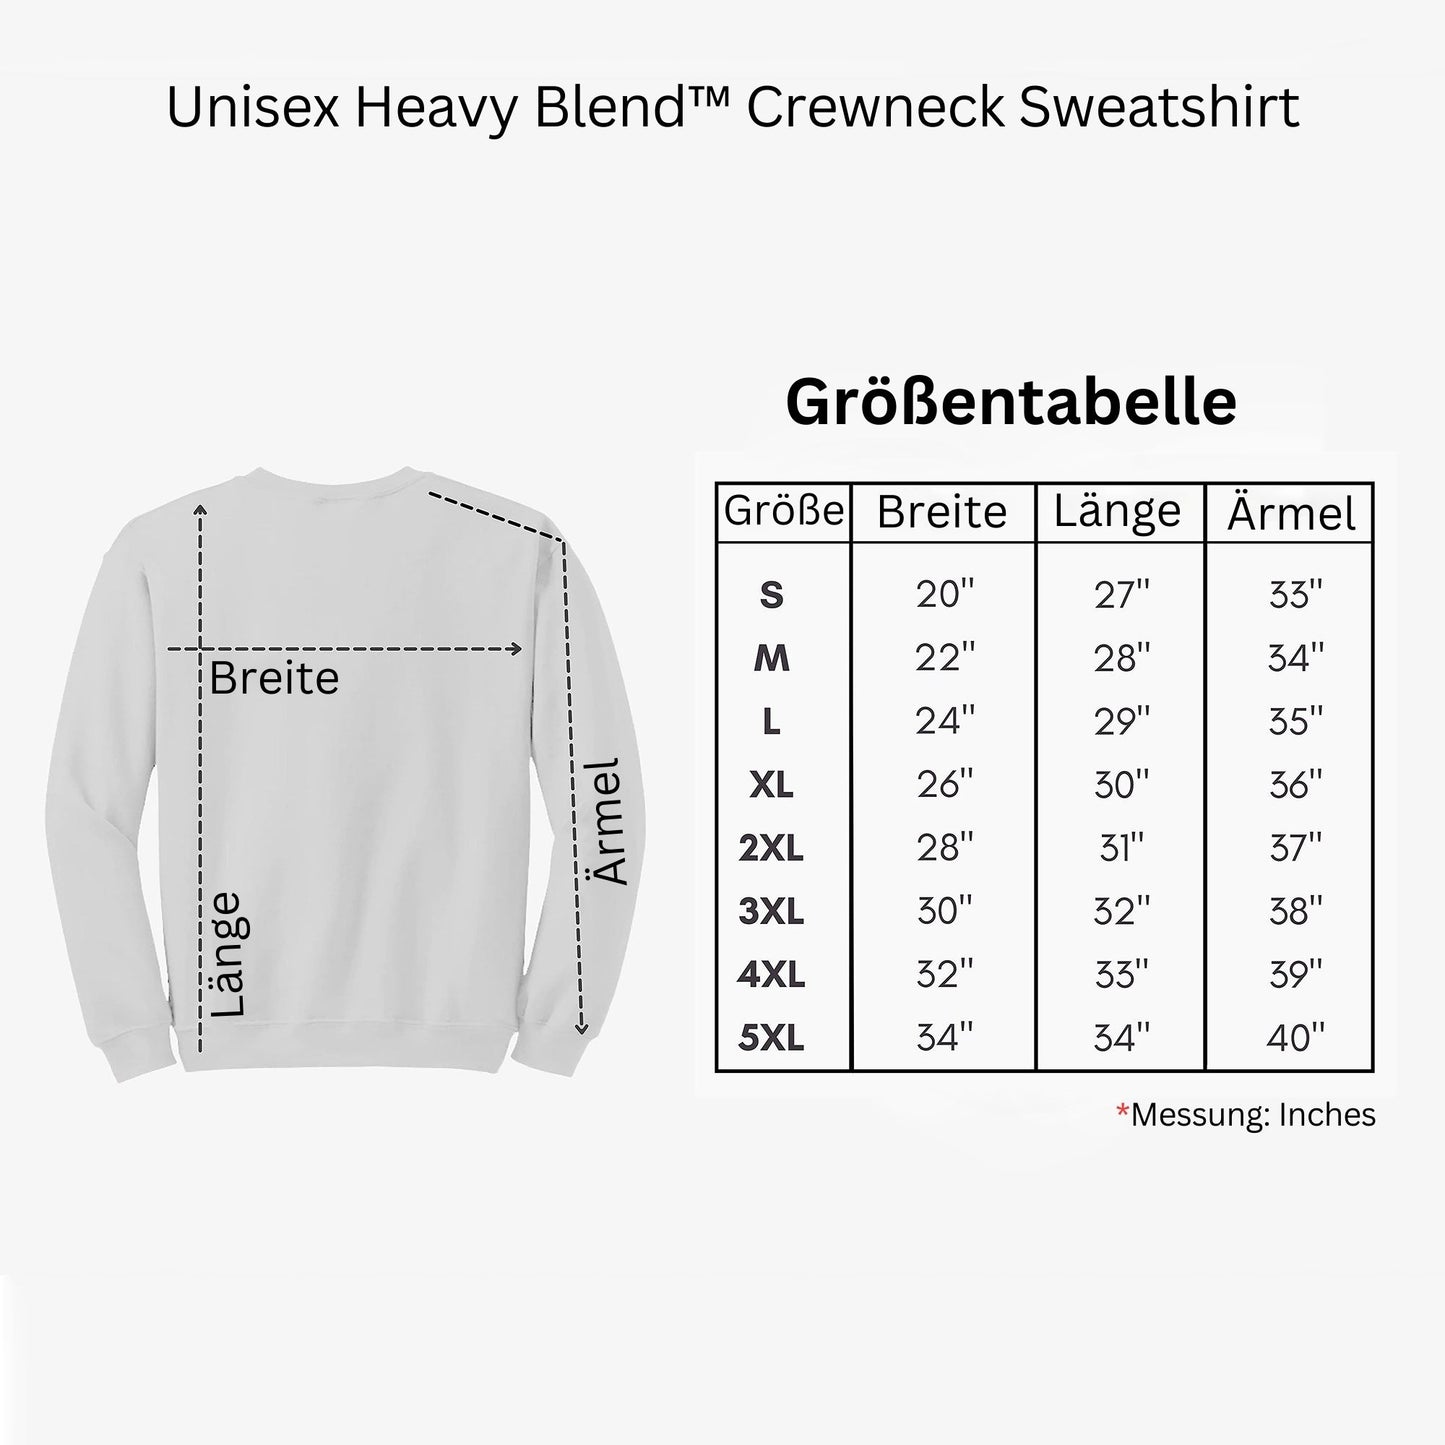 Personalized Oma Sweatshirt – Floral Design with Kids’ Names and Special Years